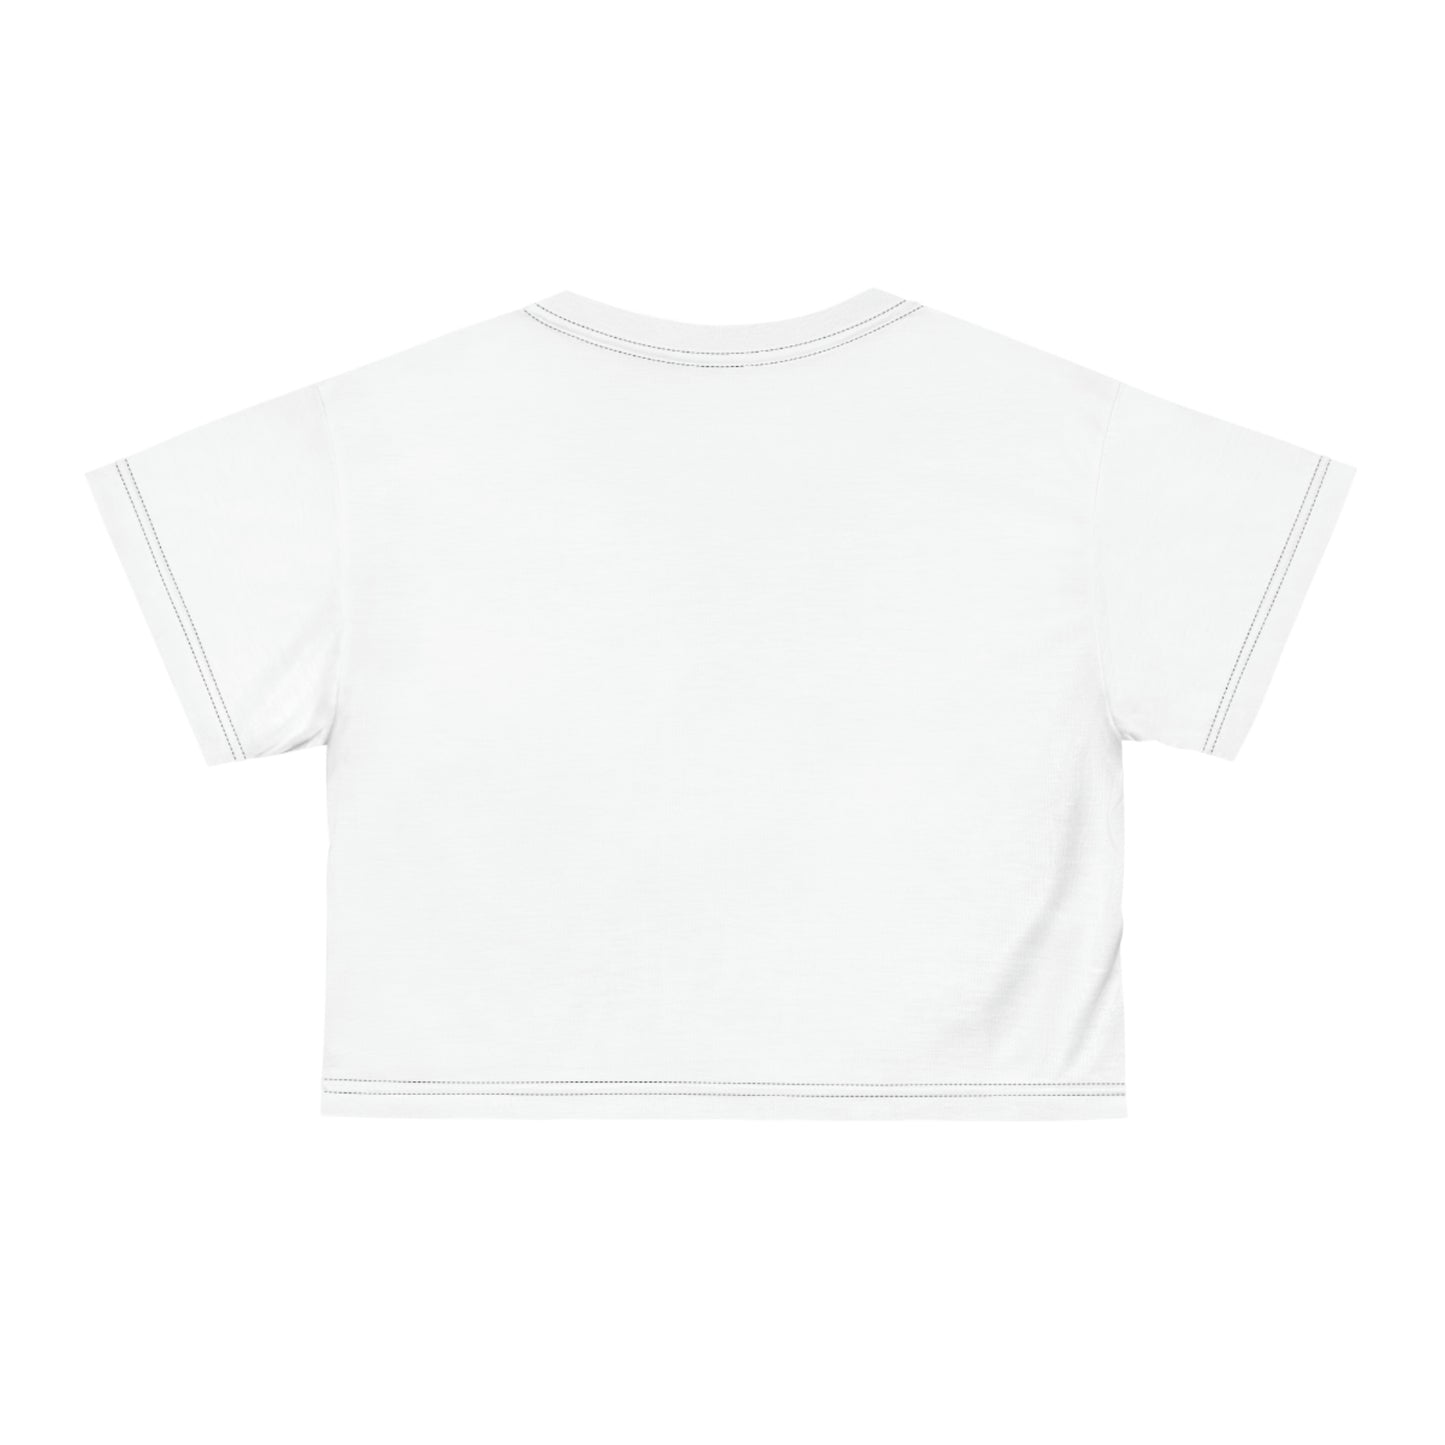 White Crop Top Tee - Abstract Pattern